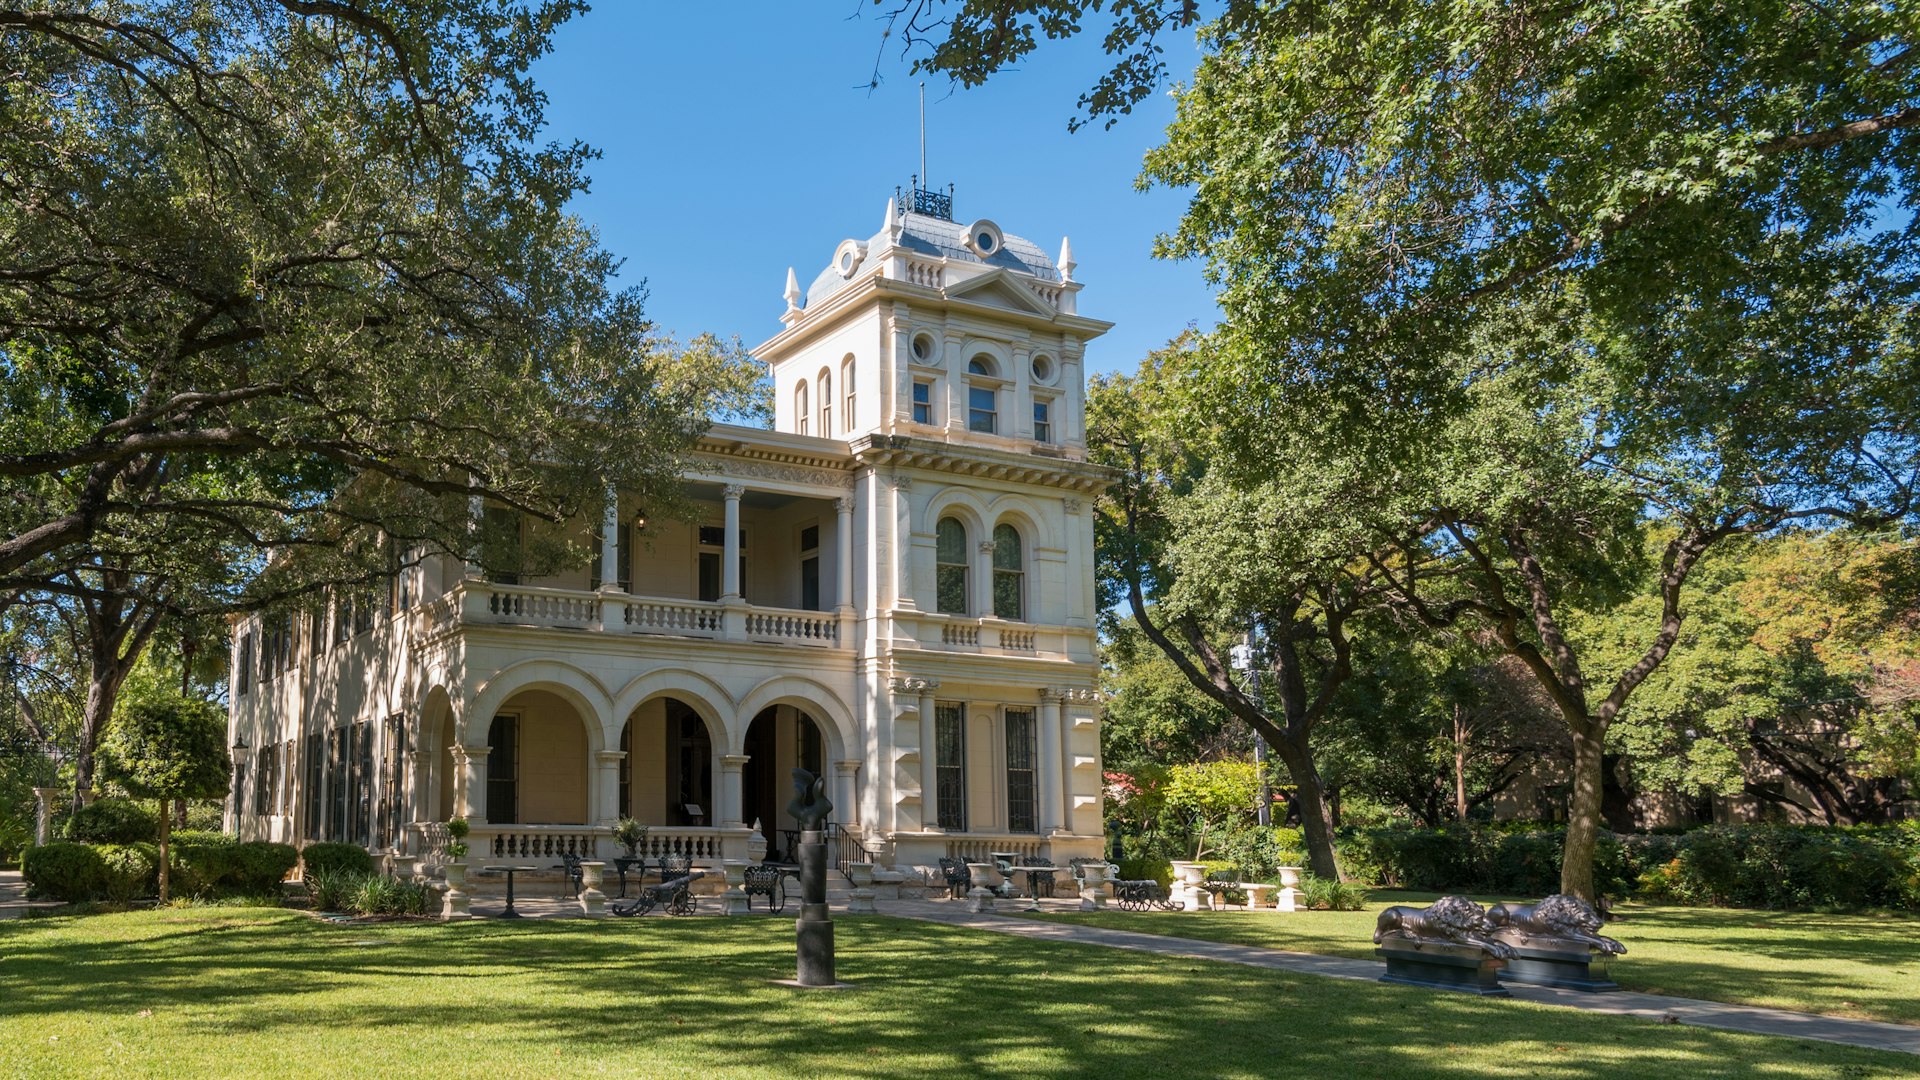 An old Italianate house in King William Historic District in San Antonio